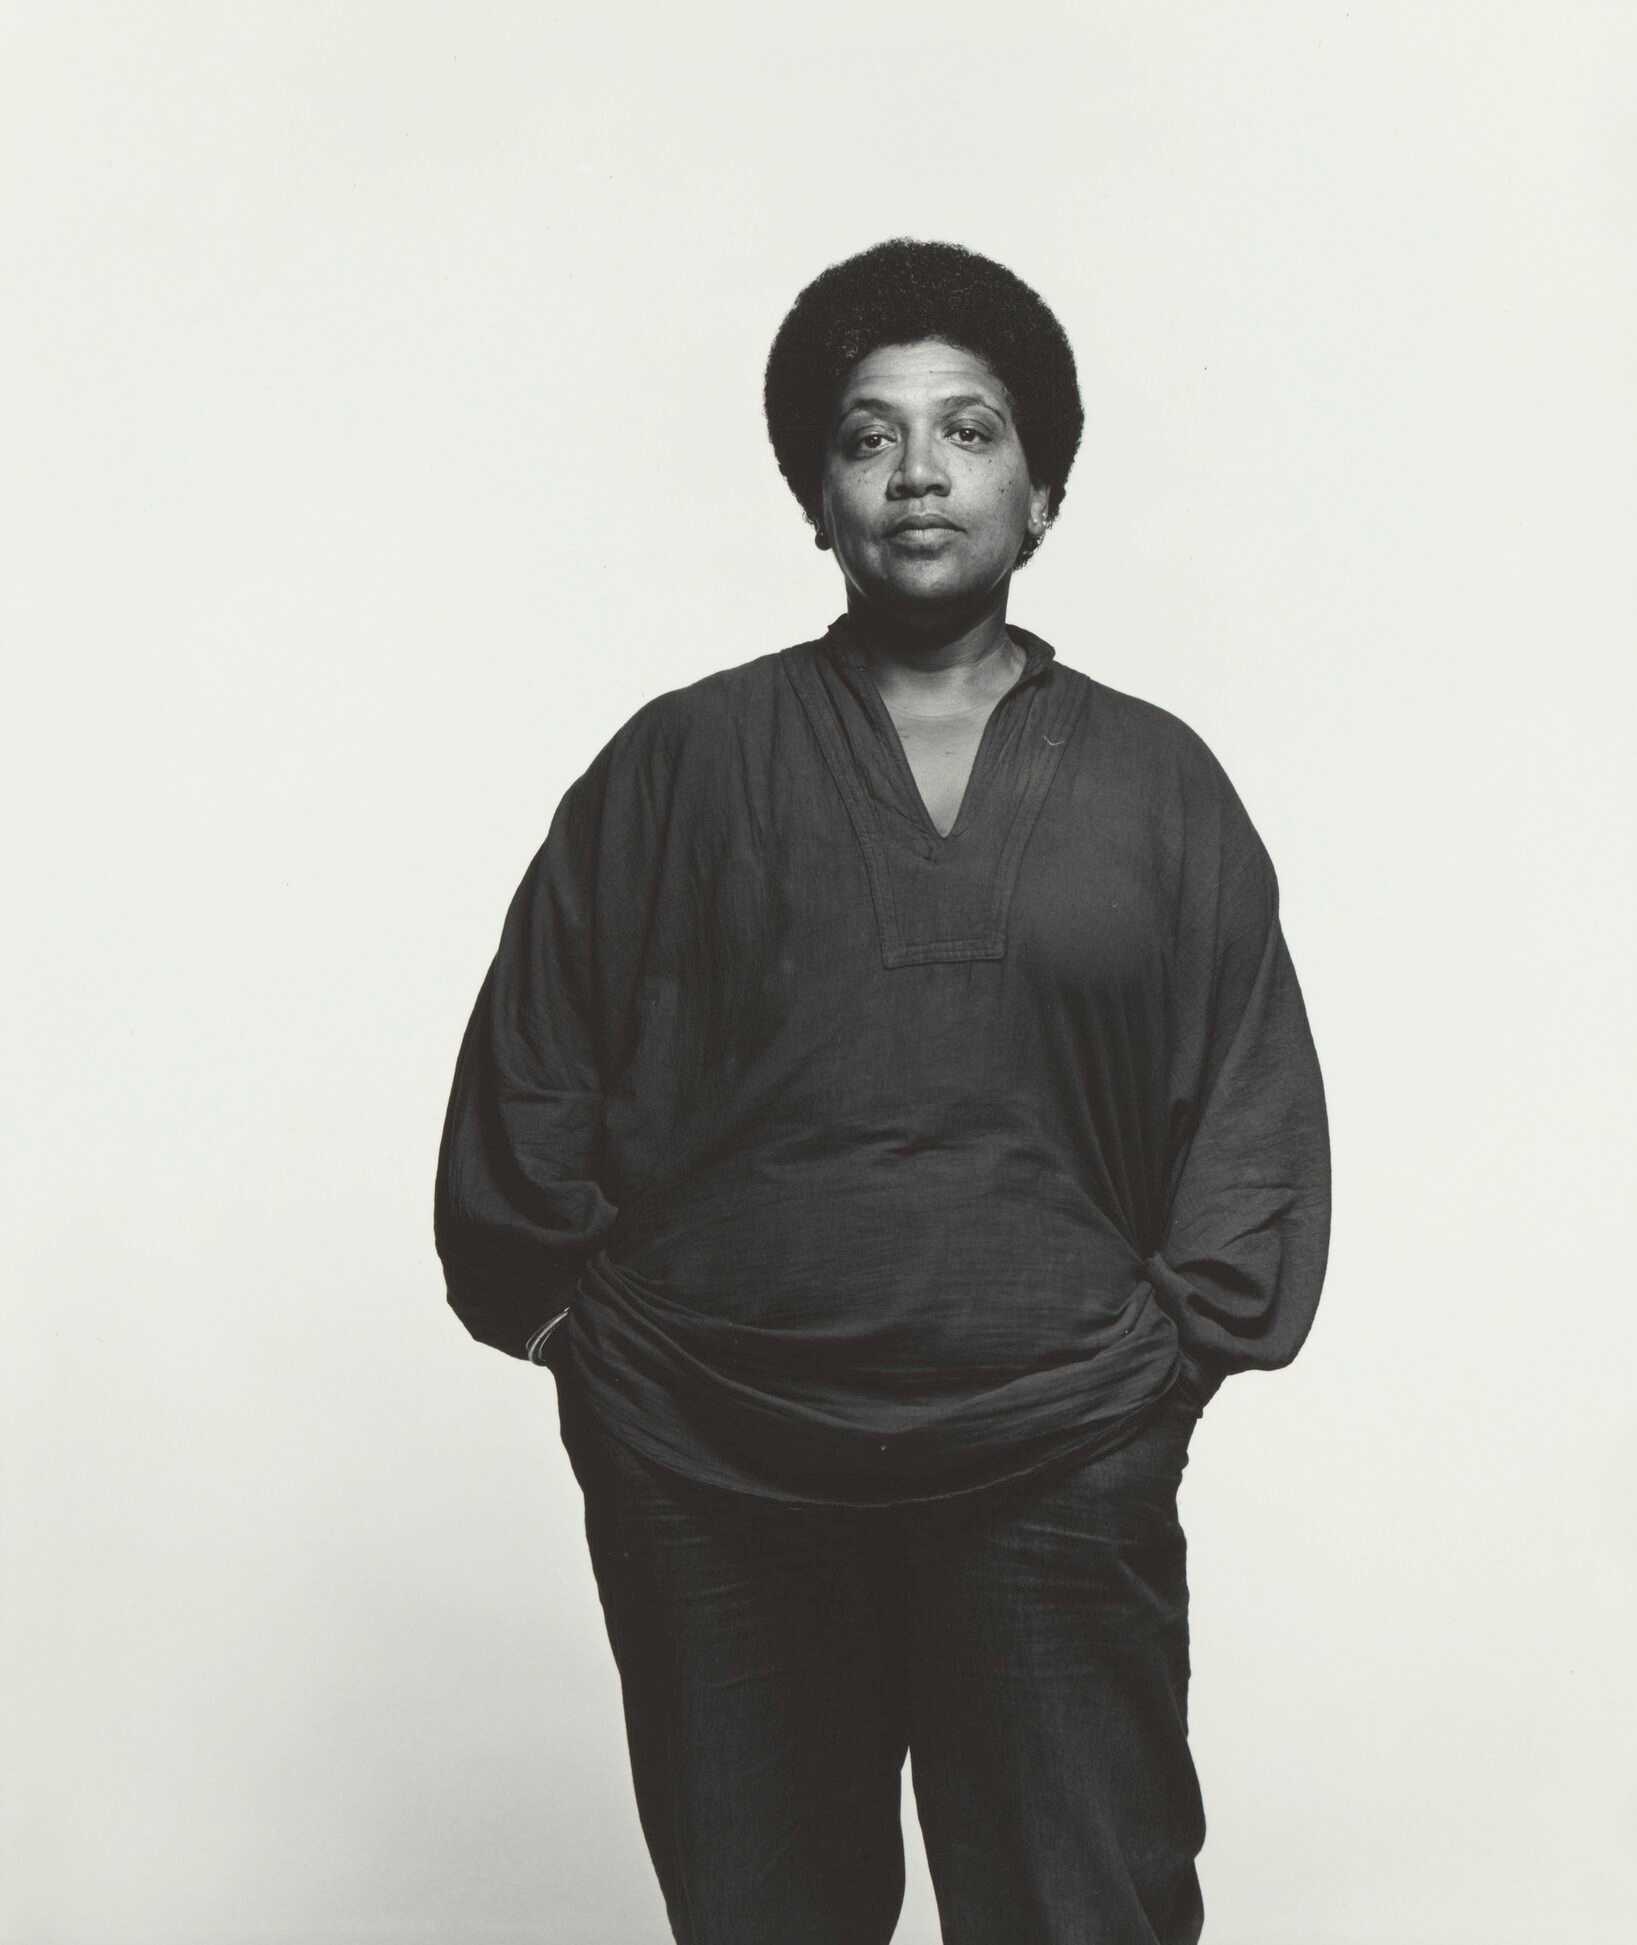 A black and white photograph of Audre Lorde. She is featured standing, facing the camera with her hands in her pockets. The back of the photograph has caption information at center and the number [3034] in the top left corner.